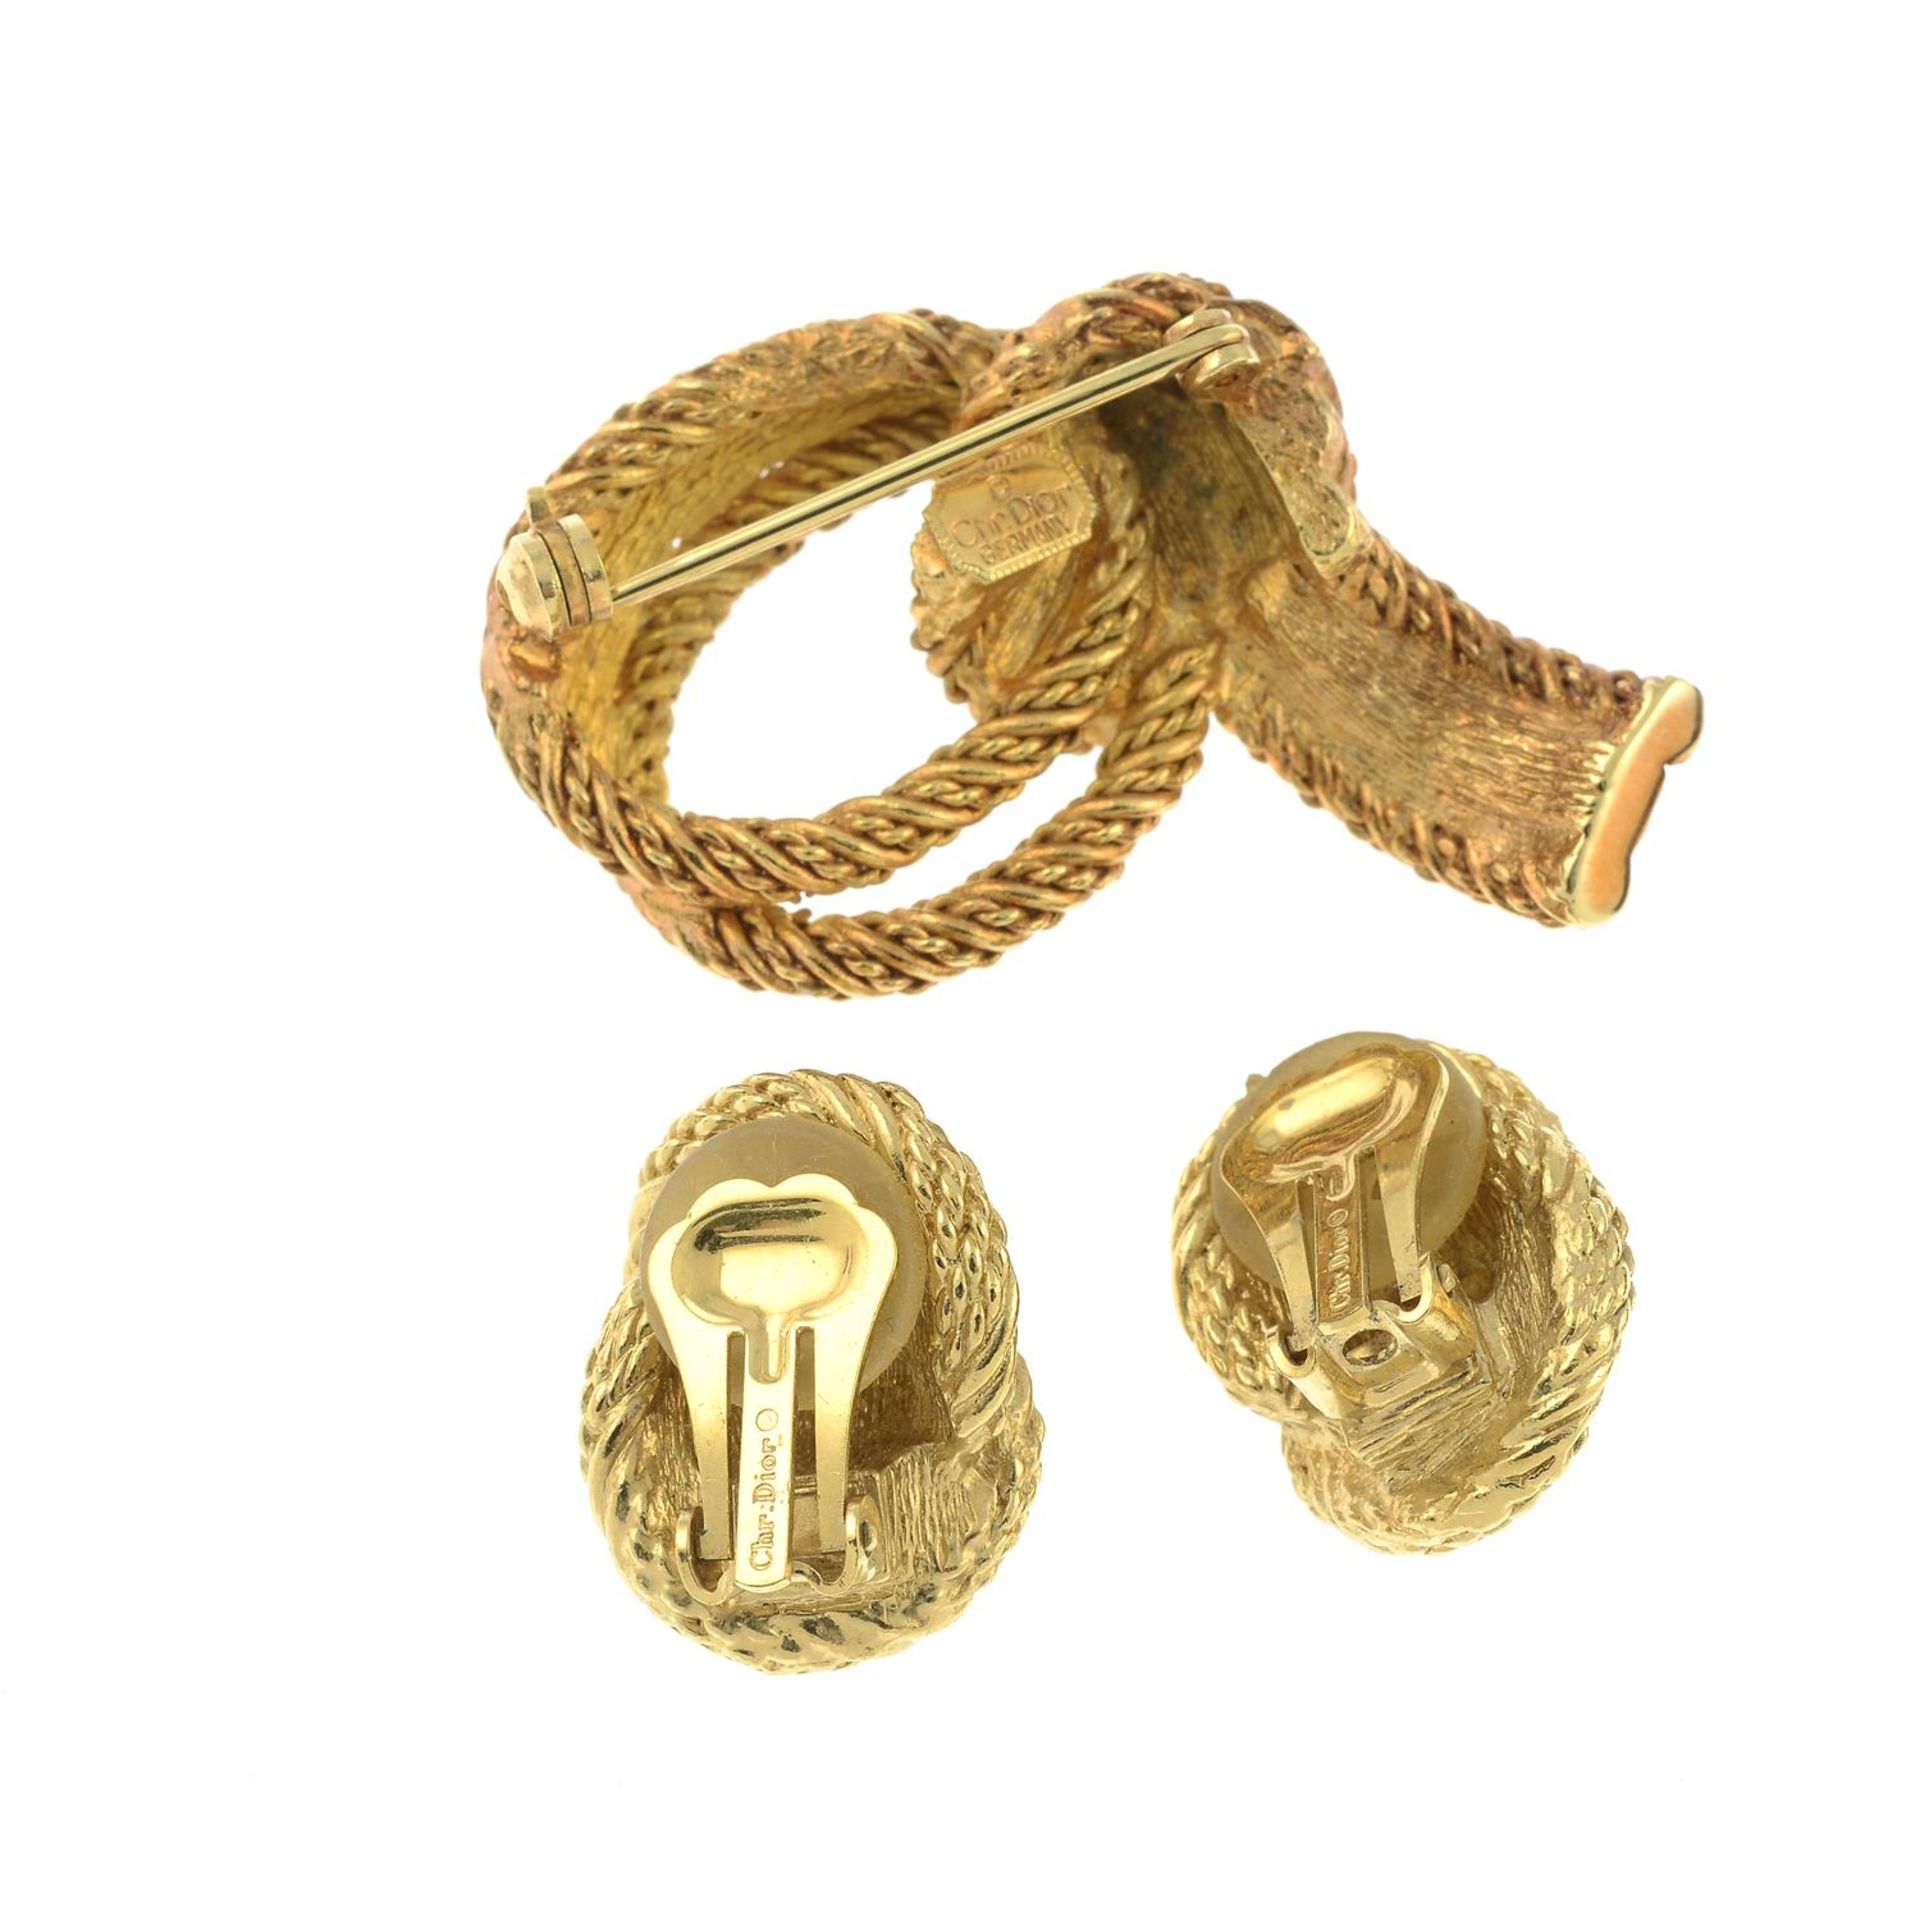 CHRISTIAN DIOR - a knot brooch and a pair of clip-on earrings. - Image 2 of 2